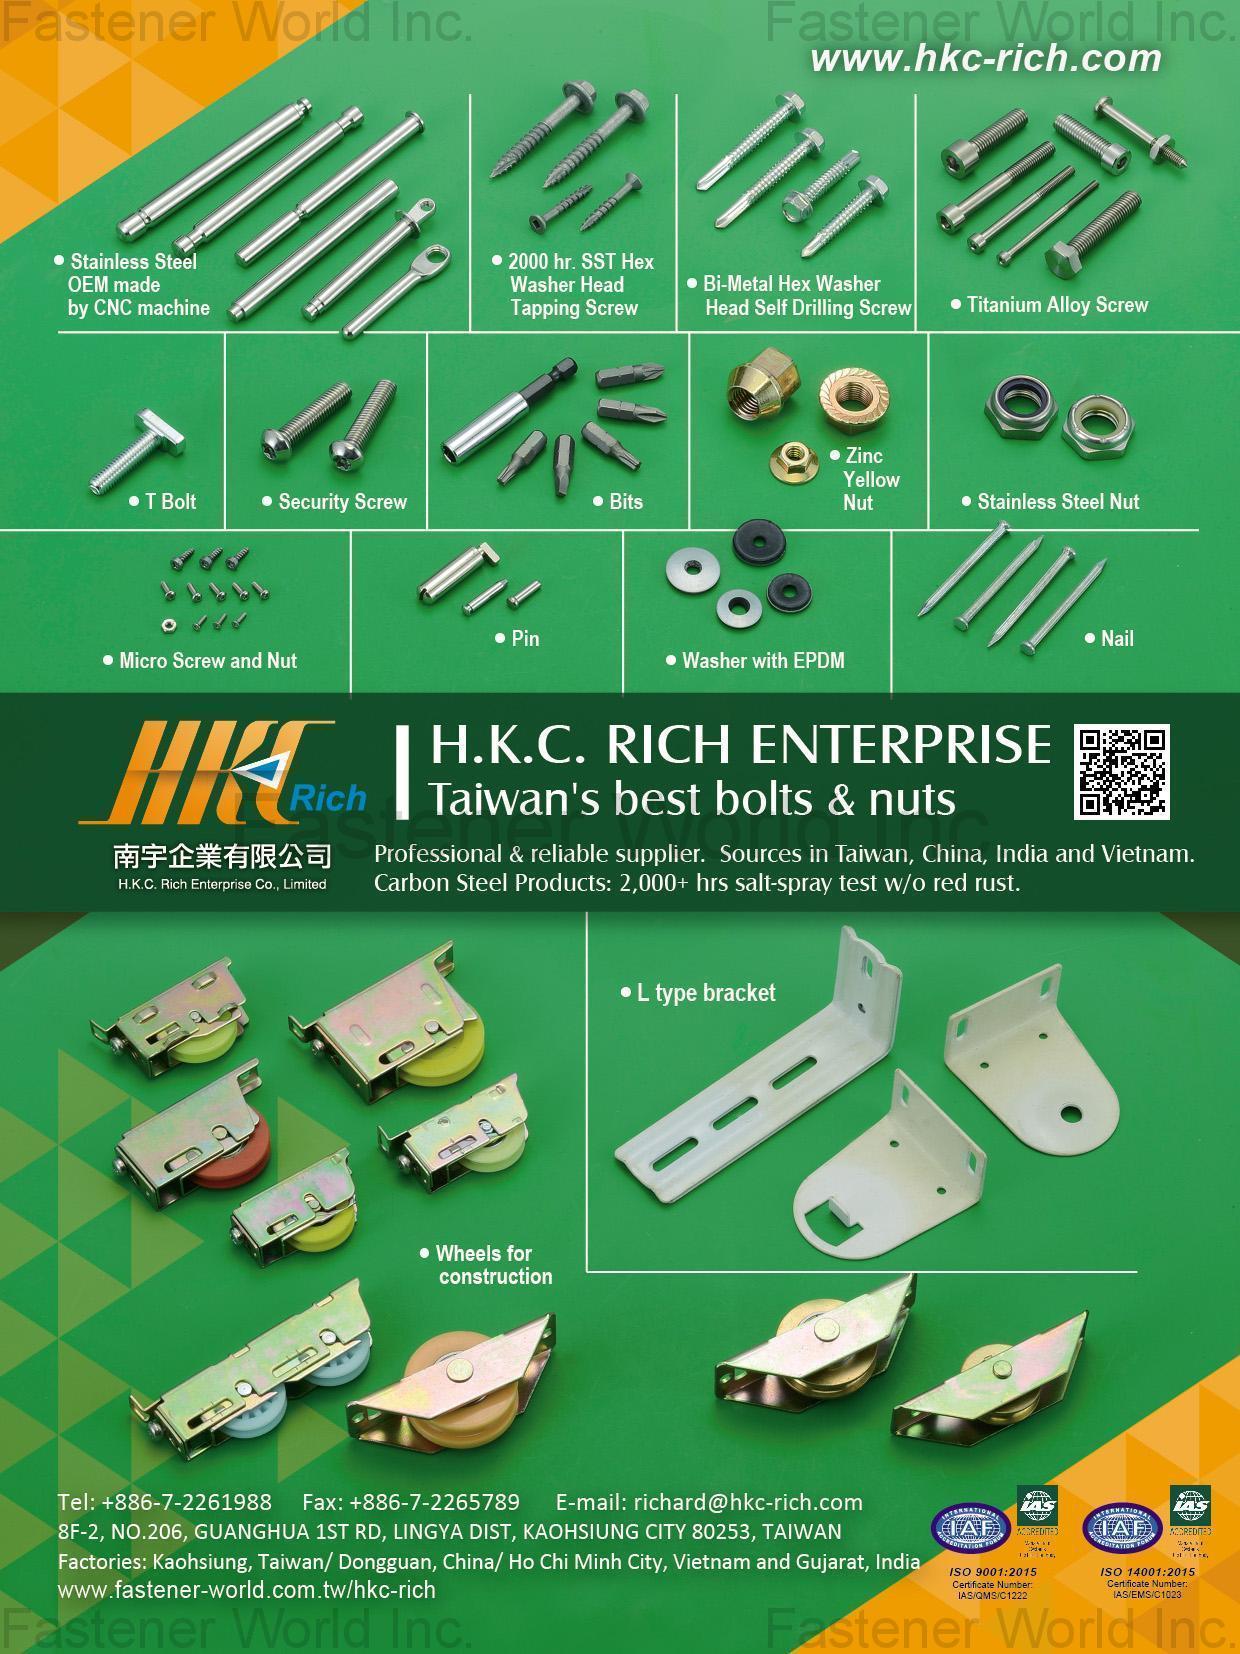 H.K.C. RICH ENTERPRISE , SST Hhead Tapping Screw, Bi-Metal Hex Washer Head Self Drilling Screw, Titanium Alloy Screw, T Bolt, Security Screws, Bits, Stainless Steel Nuts, Zinc Yellow Nuts, Micro Screw & Nut, Pins, Washer with EPDM, Nails, Wheels for construction, L type Bracket , T-head Or T-slot Bolts